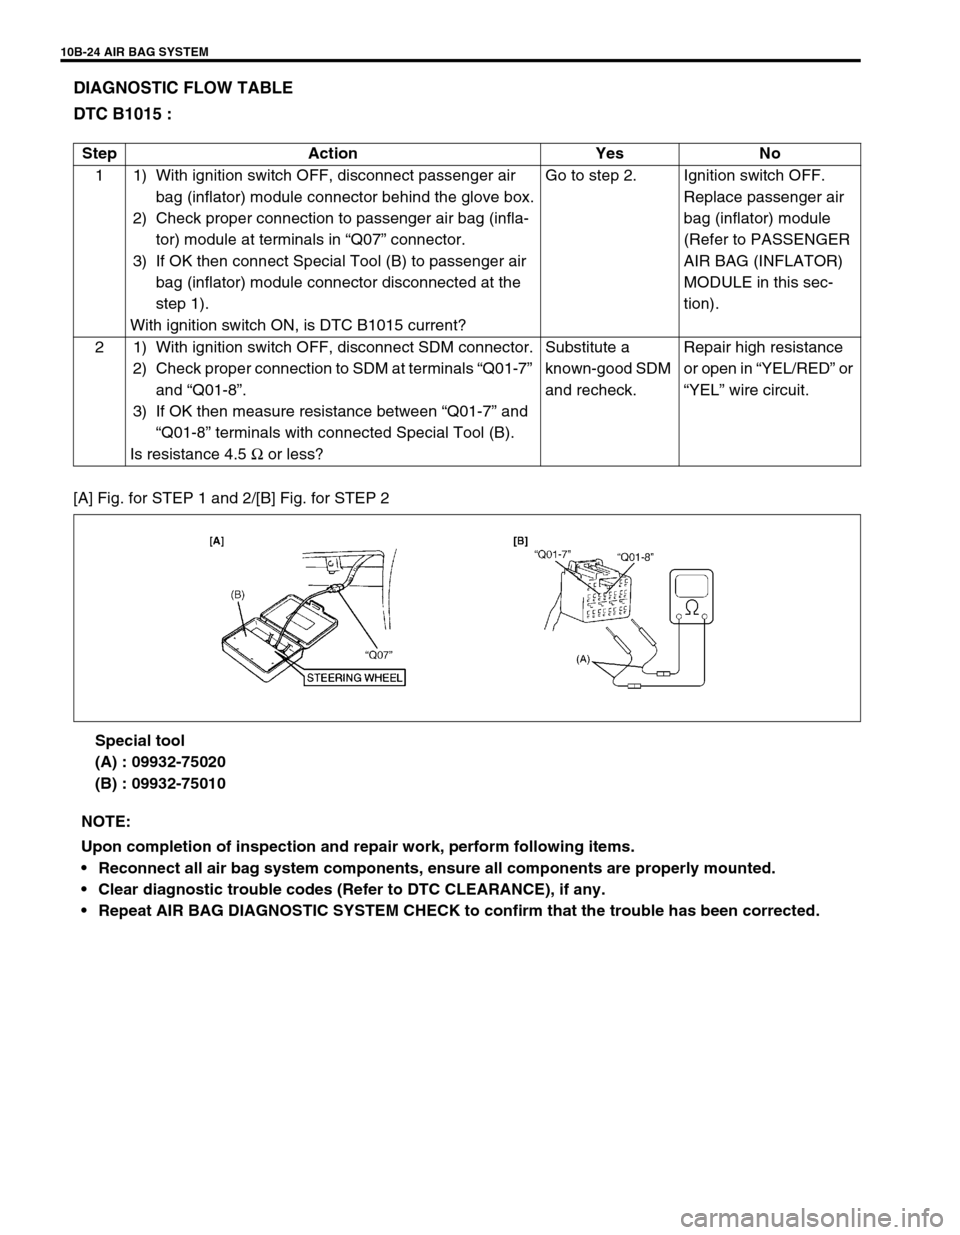 SUZUKI GRAND VITARA 1999 2.G Owners Manual 10B-24 AIR BAG SYSTEM
DIAGNOSTIC FLOW TABLE
DTC B1015 :
[A] Fig. for STEP 1 and 2/[B] Fig. for STEP 2
Special tool
(A) : 09932-75020
(B) : 09932-75010 Step Action Yes No
1 1) With ignition switch OFF,